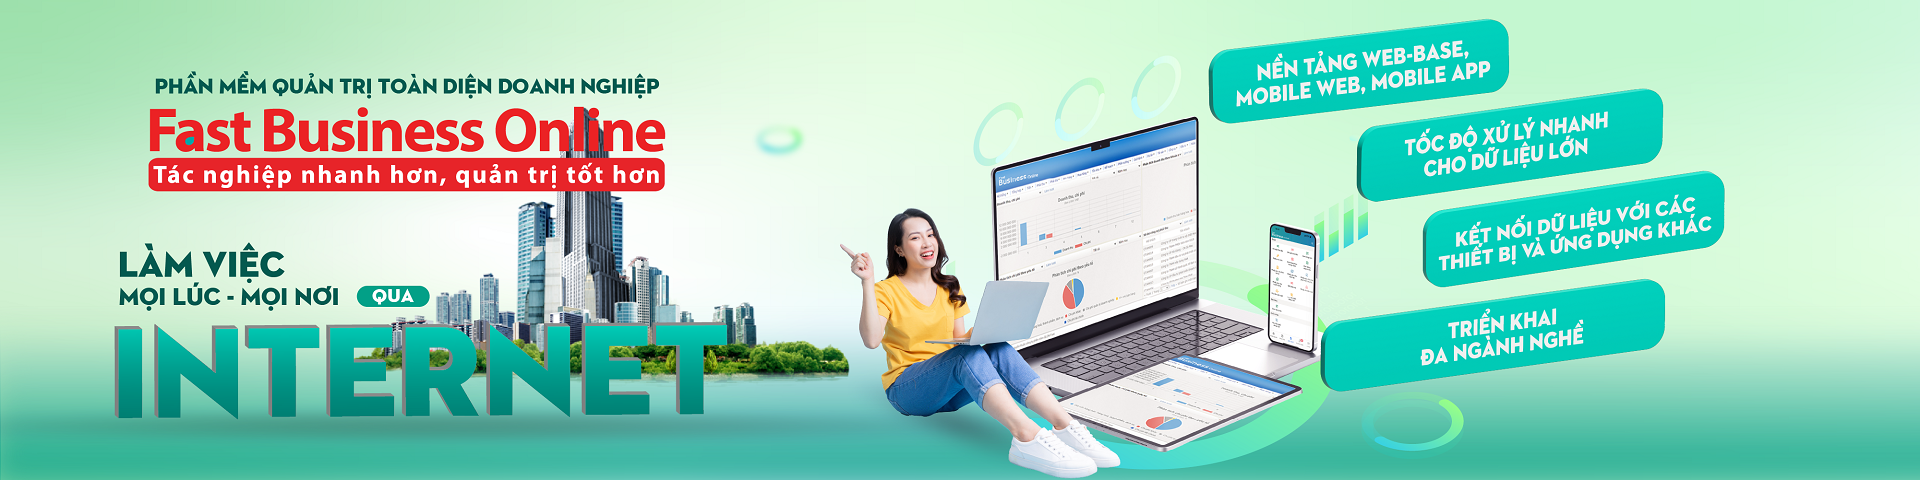 Hệ thống ERP - Fast Business Online